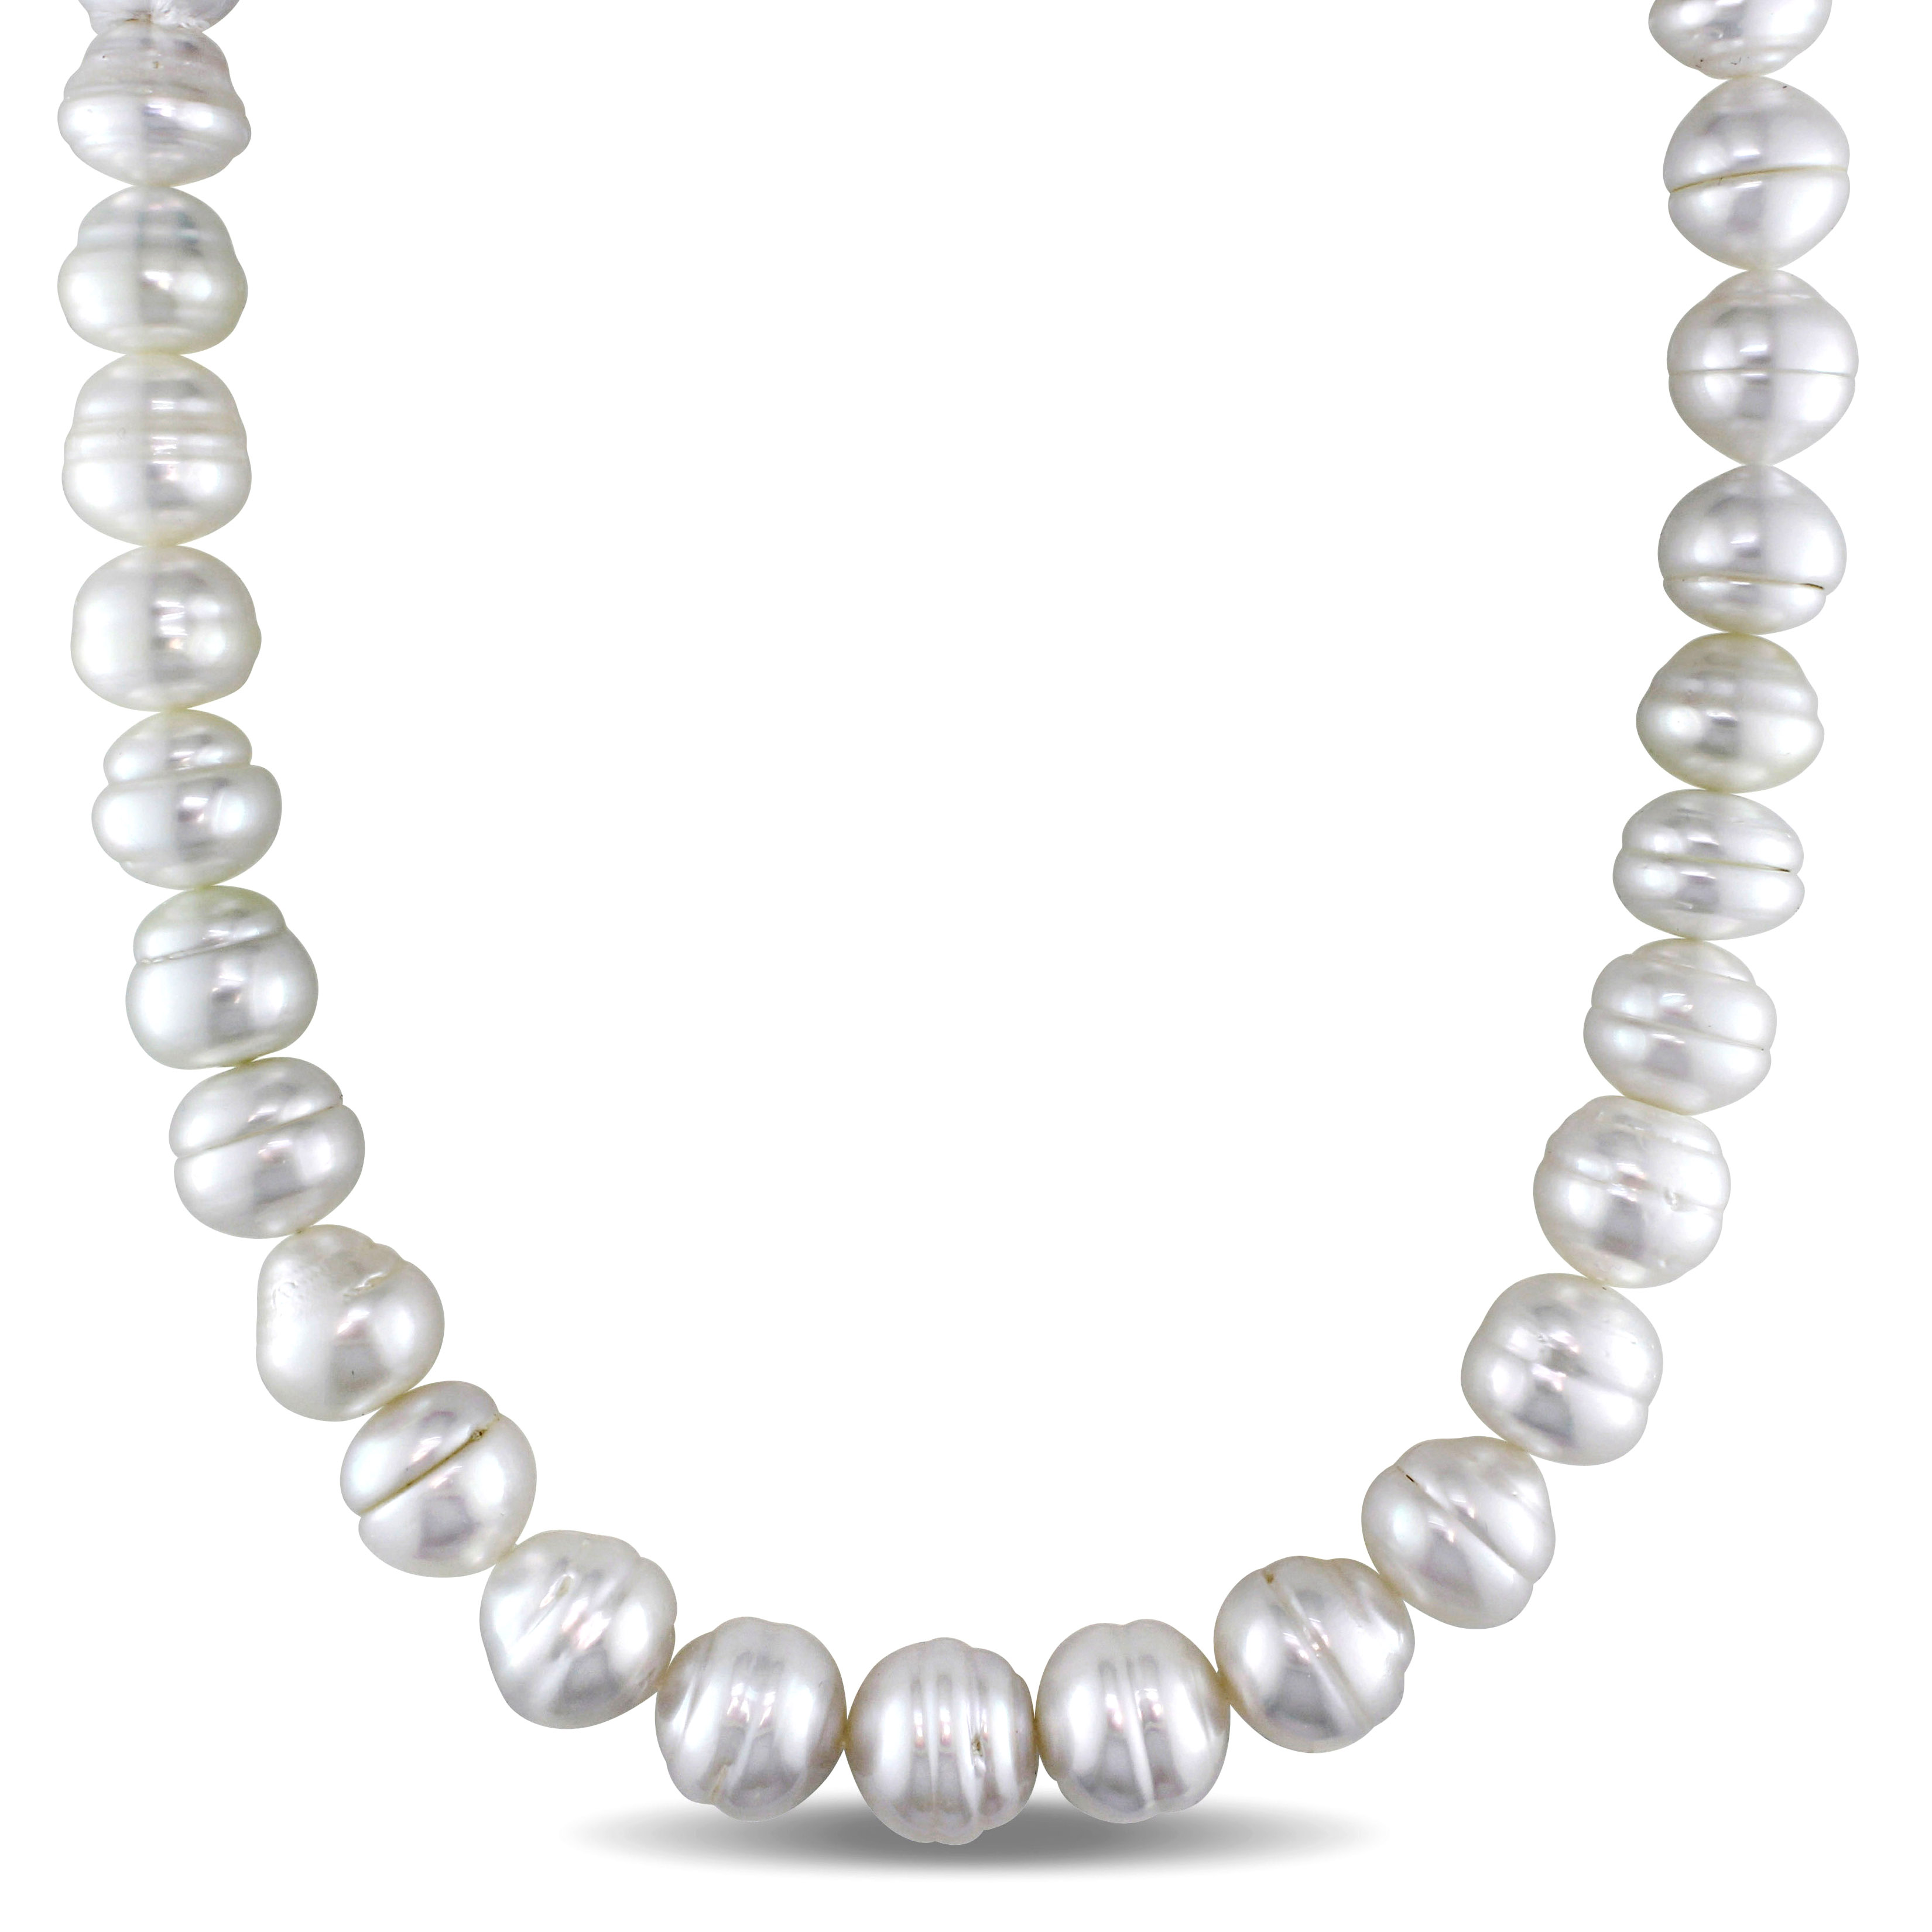 11-13.9 MM Creamy South Sea Graduated Pearl Strand with 14k Yellow Gold Diamond Accent Ball Clasp - 18 in